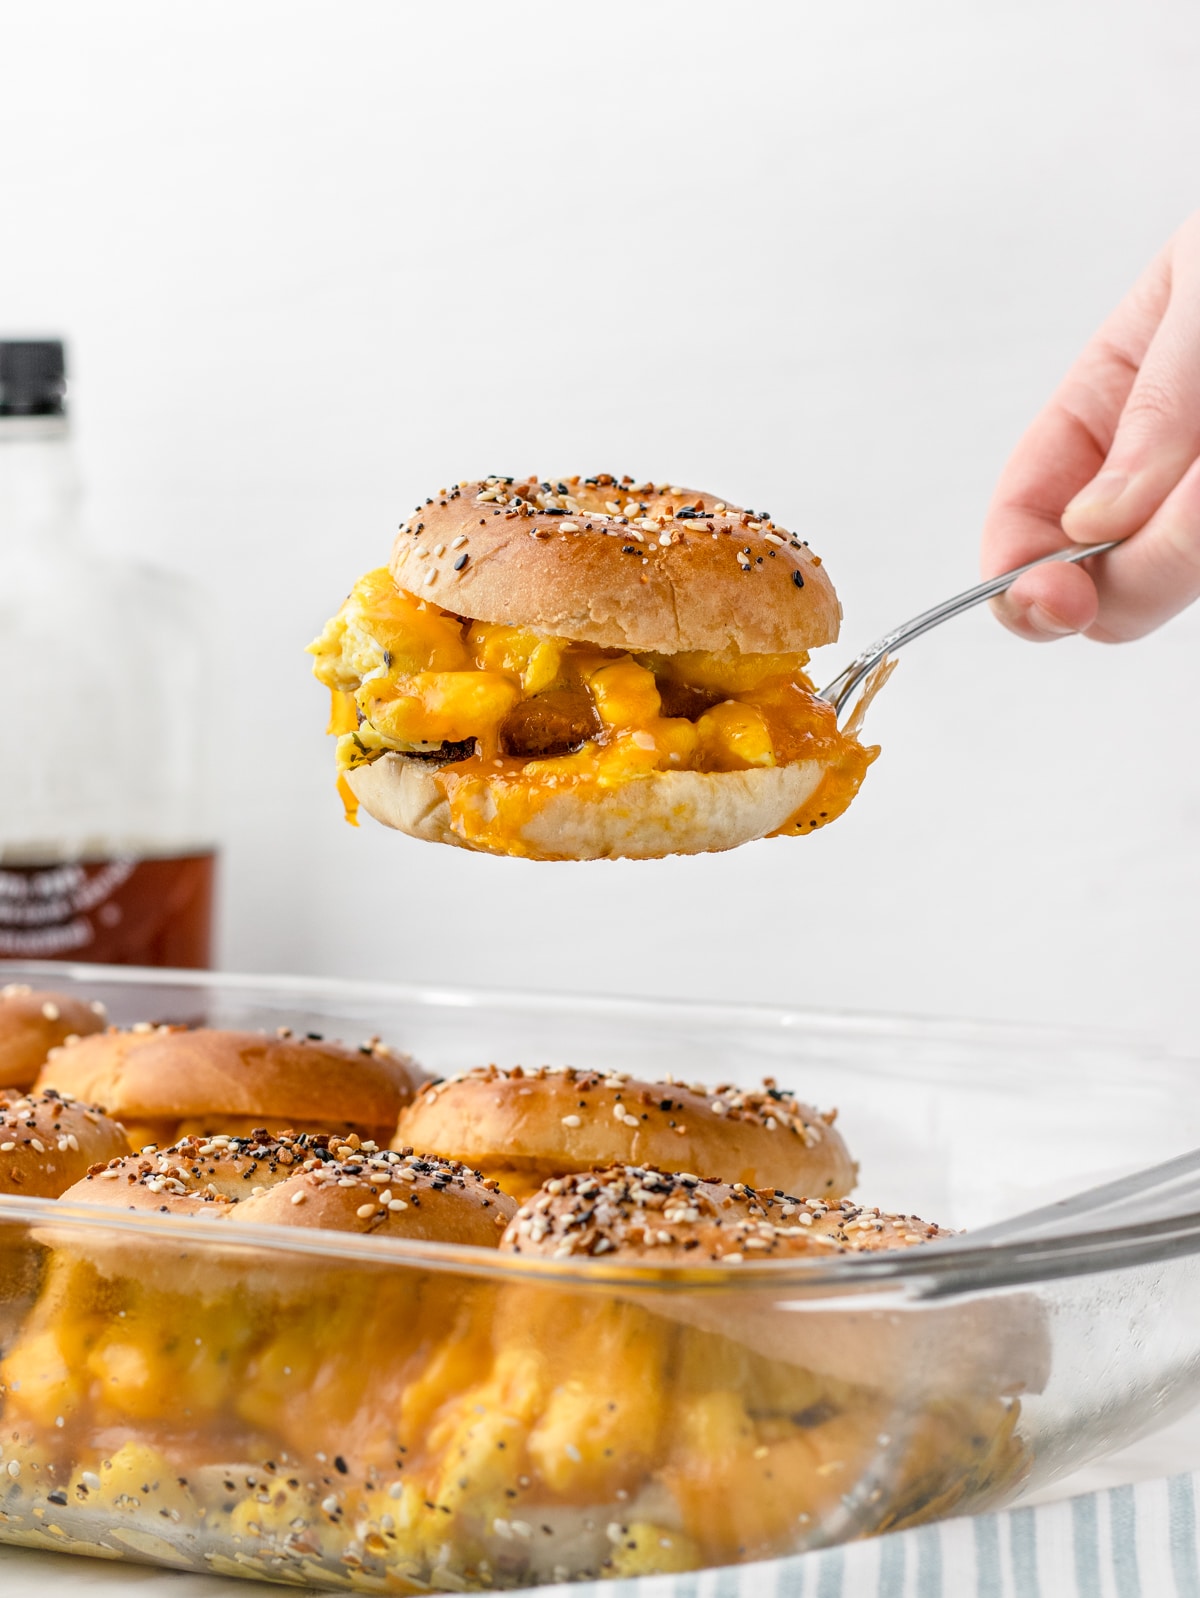 Breakfast Bagel Slider being lifted from the pan and served at brunch.